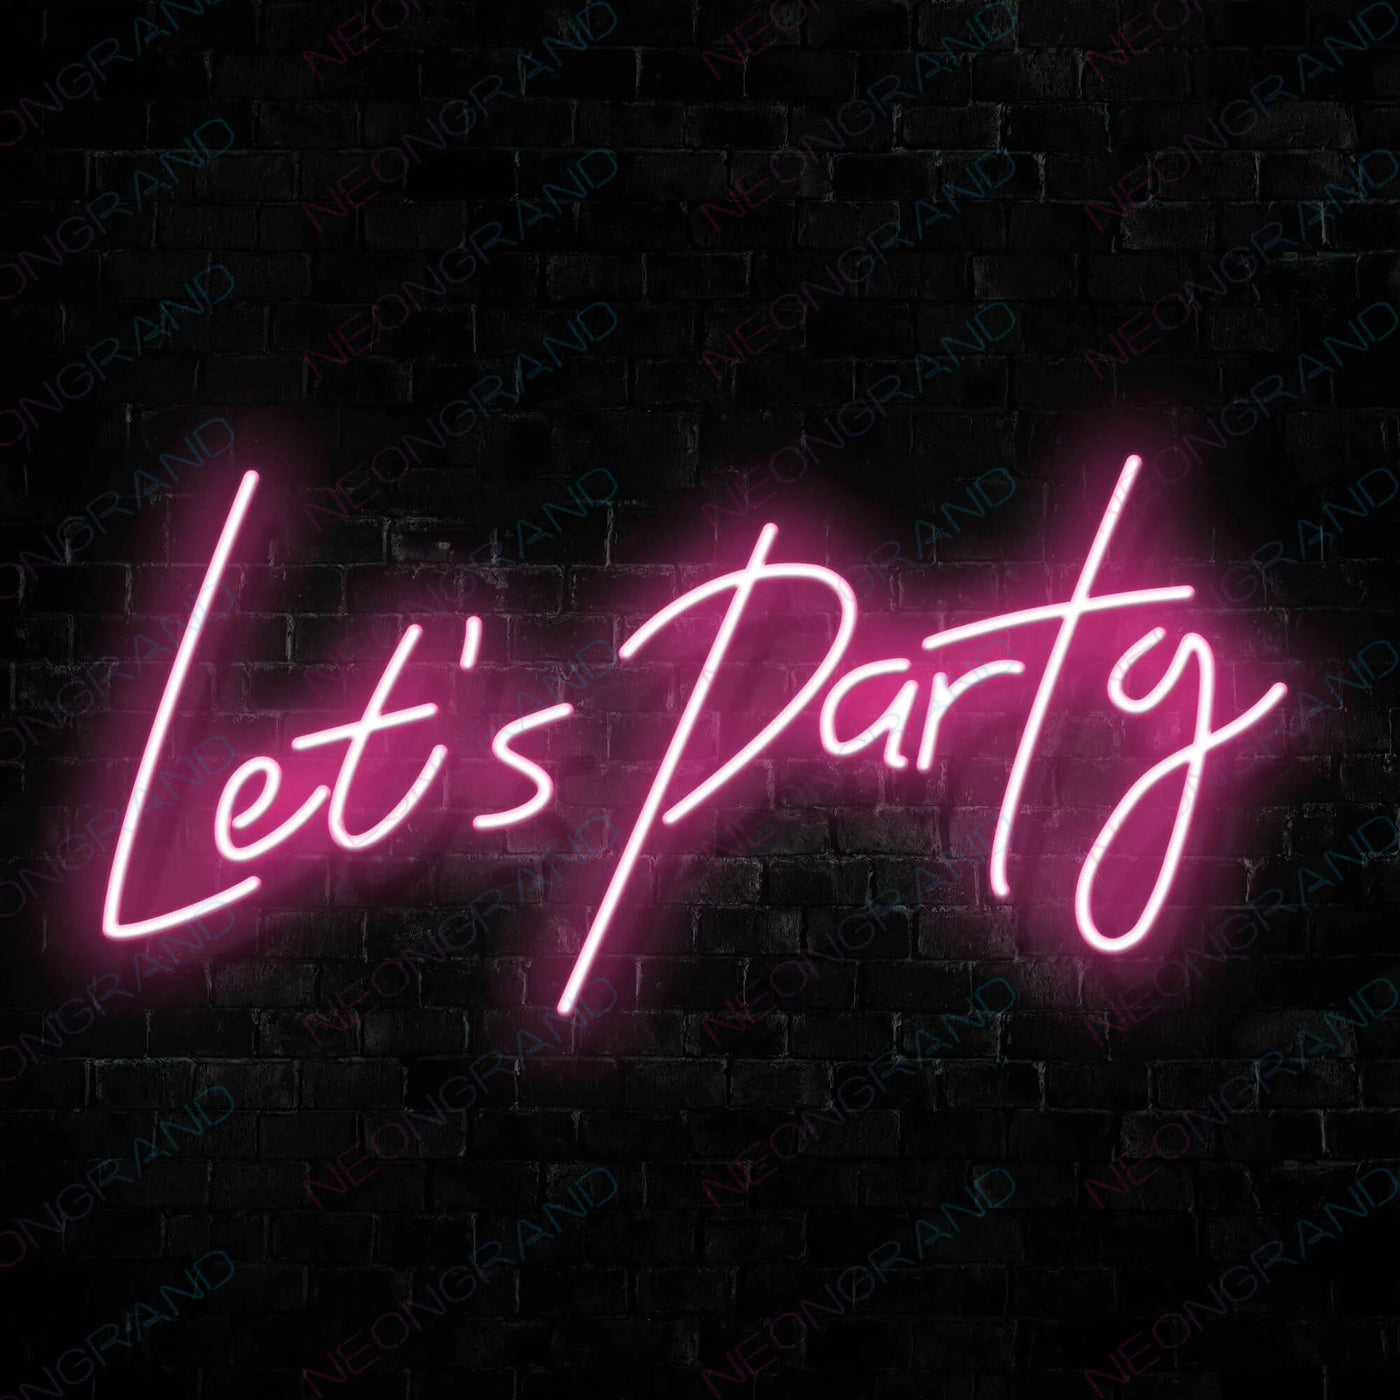 Let's Party Neon Sign Led Light Pink